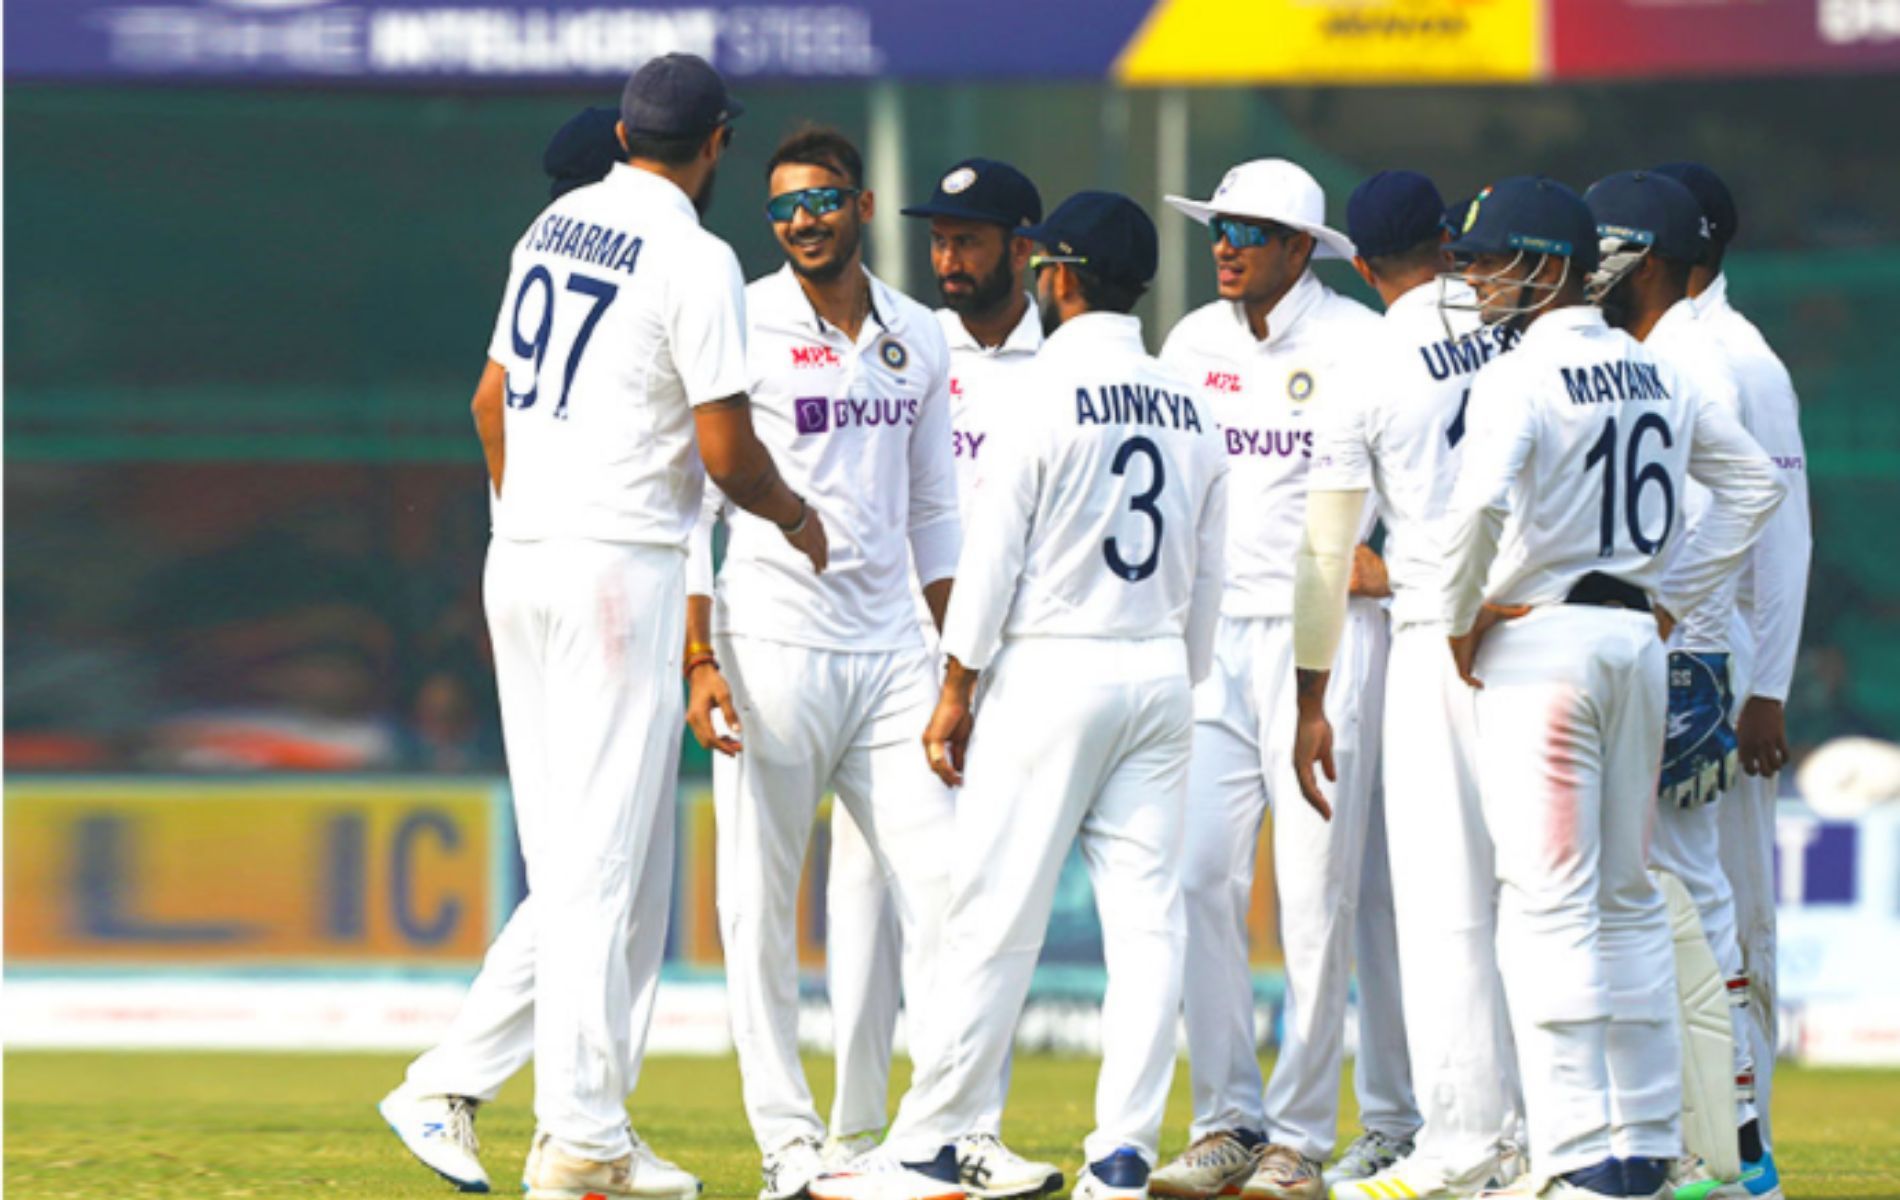 India took a lead of 63 runs at the end of Day 3 of the first Test against New Zealand.